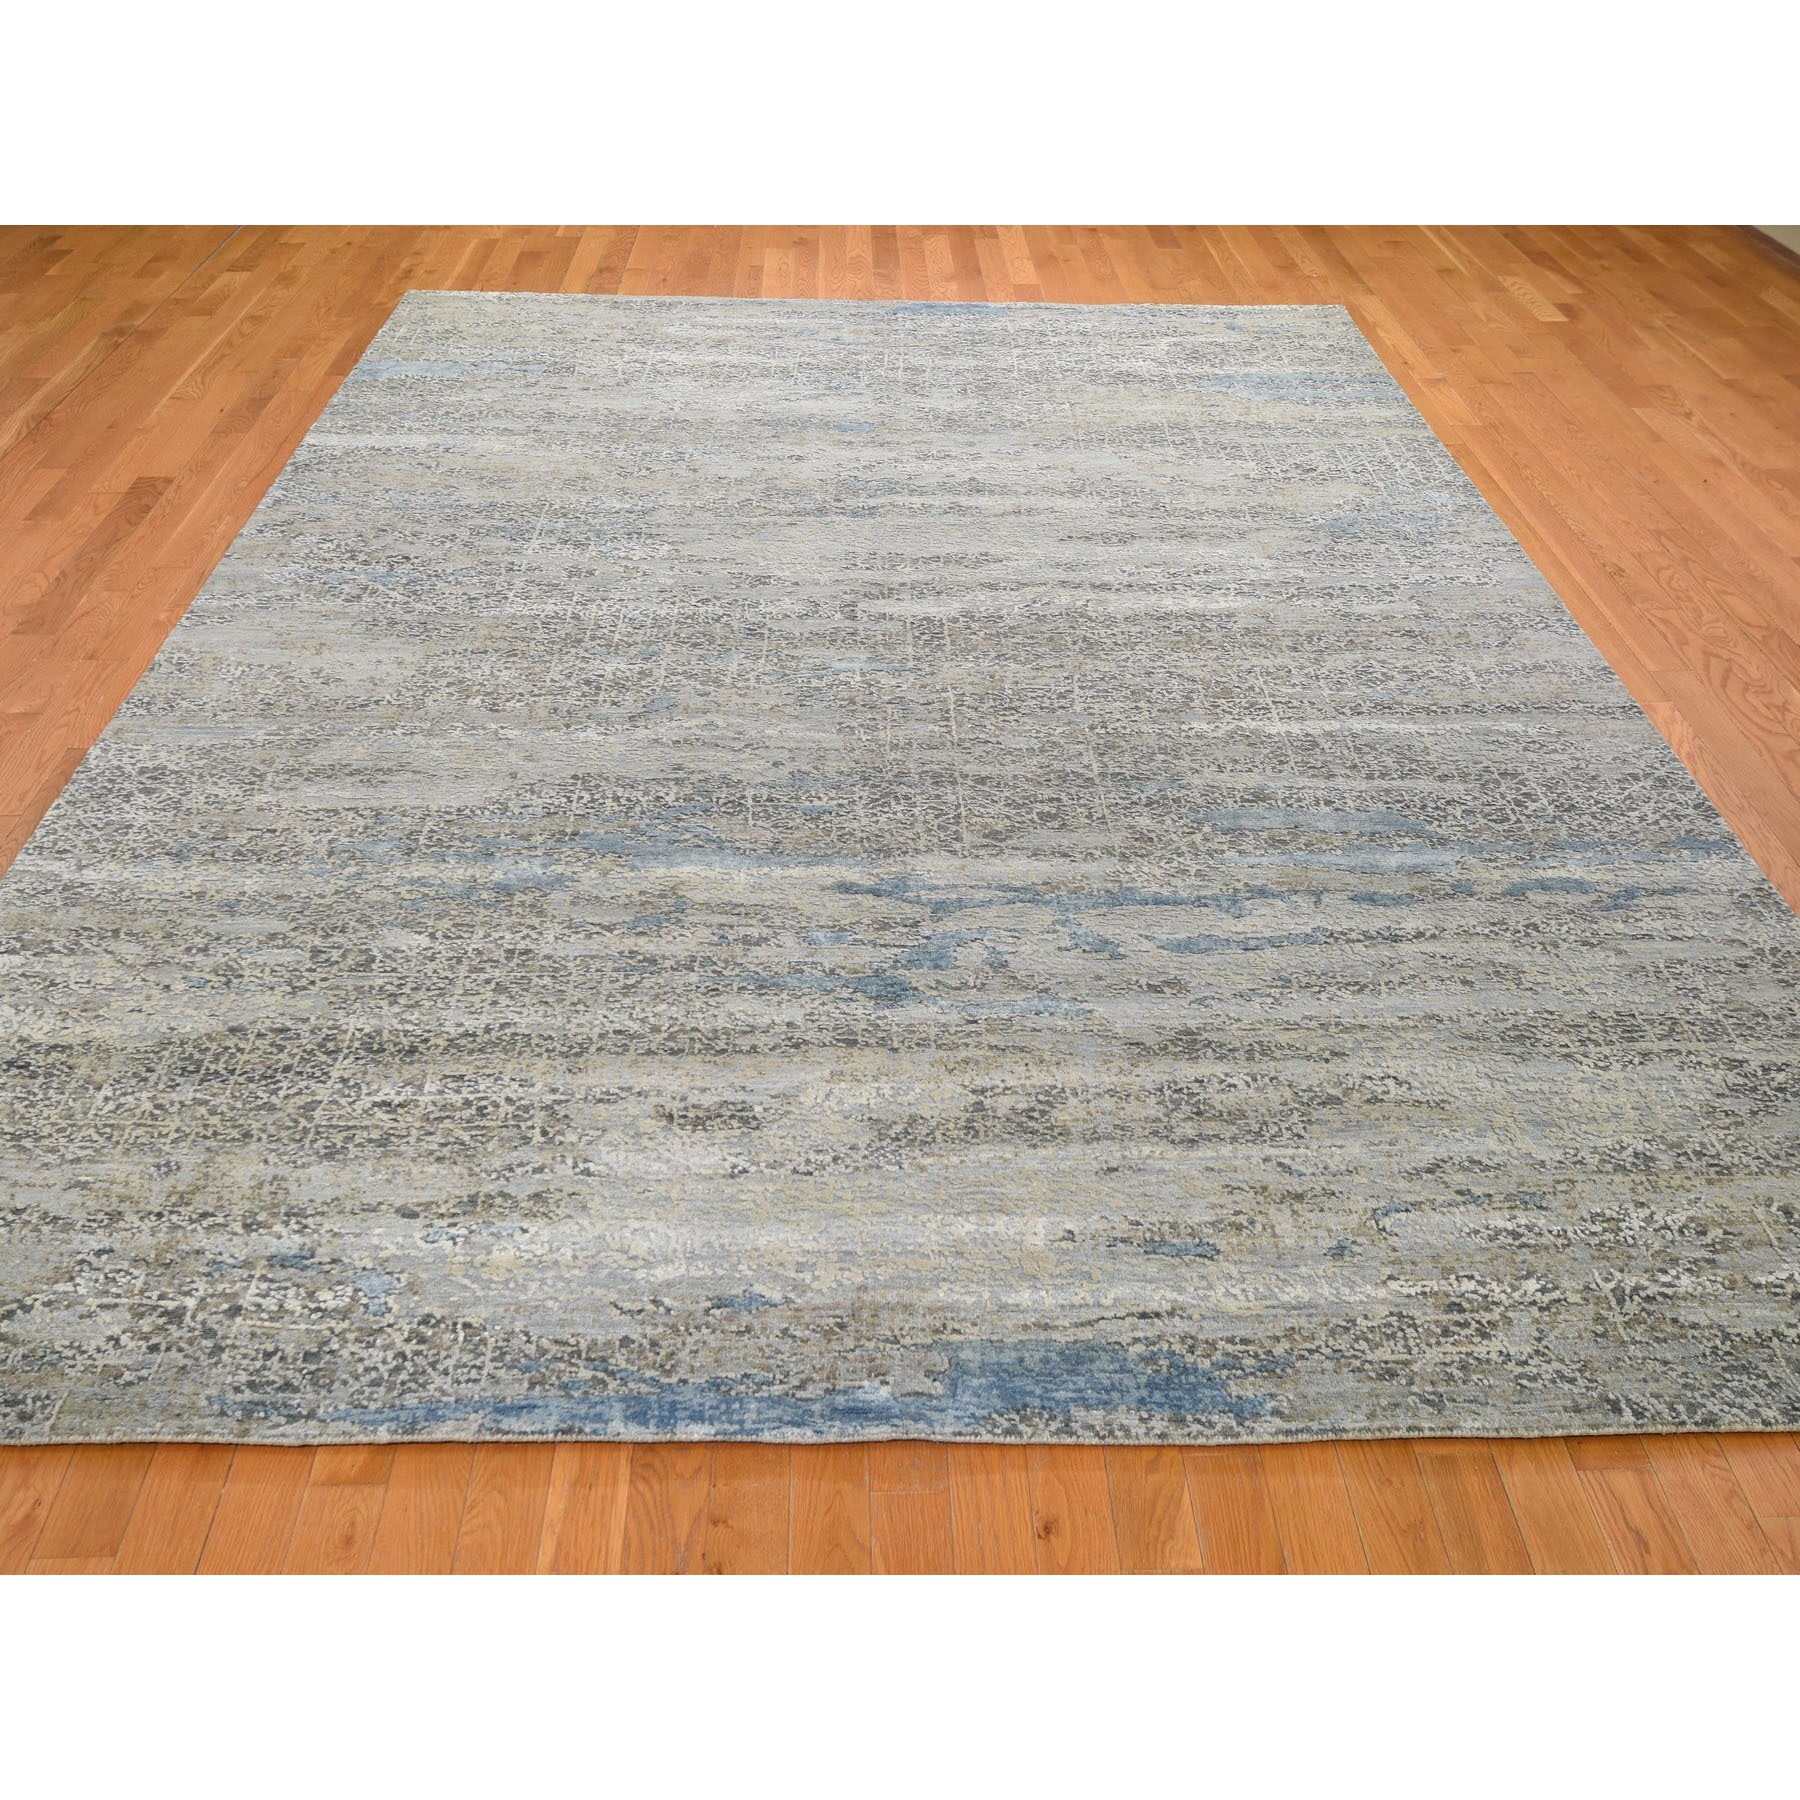 9'x12'3" Wool With Pure Silk Abstract Design Soft Color Hand Woven Oriental Rug 